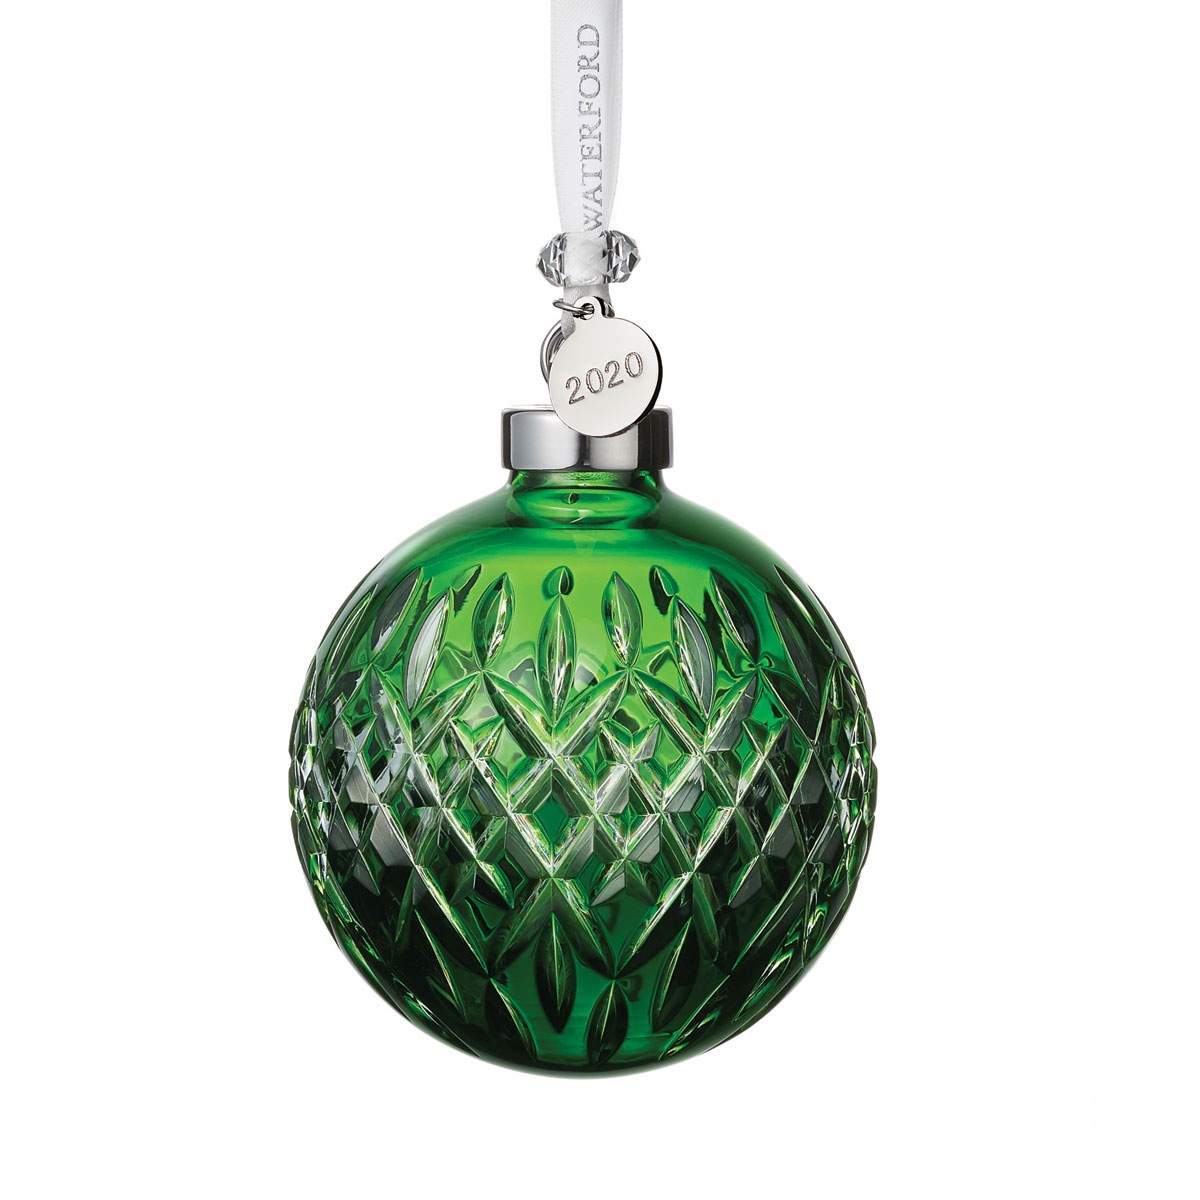 Waterford Crystal 2020 Emerald Ball Christmas Ornament